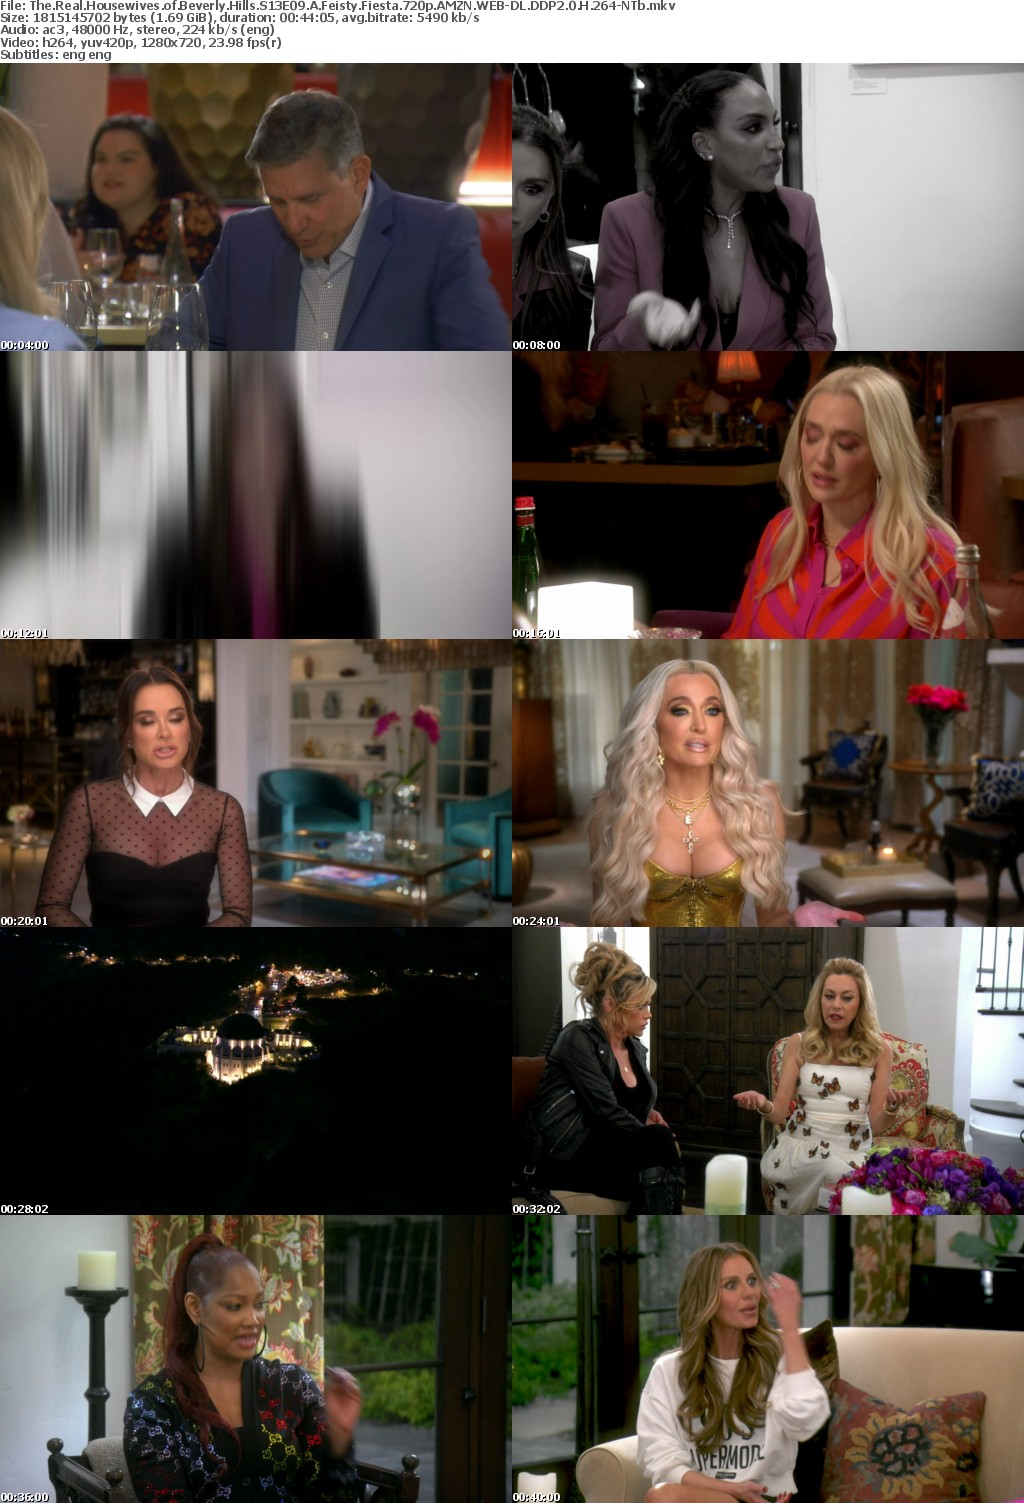 The Real Housewives of Beverly Hills S13E09 A Feisty Fiesta 720p AMZN WEB-DL DDP2 0 H 264-NTb